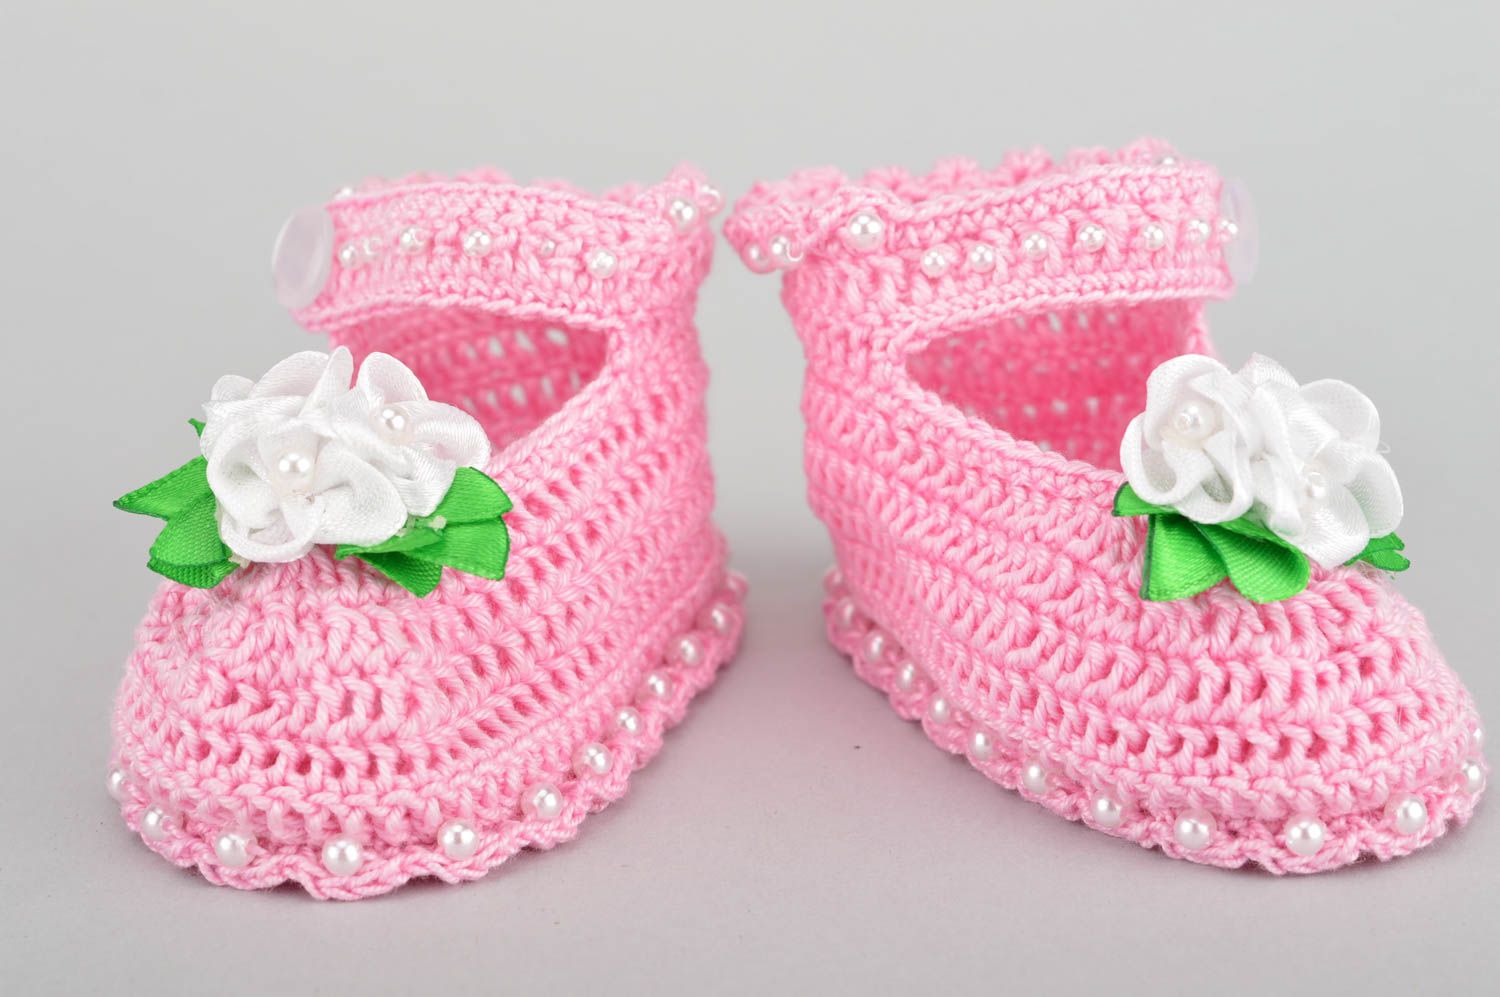 Crocheted cute designer handmade pink baby bootees made of acryl for girls photo 2